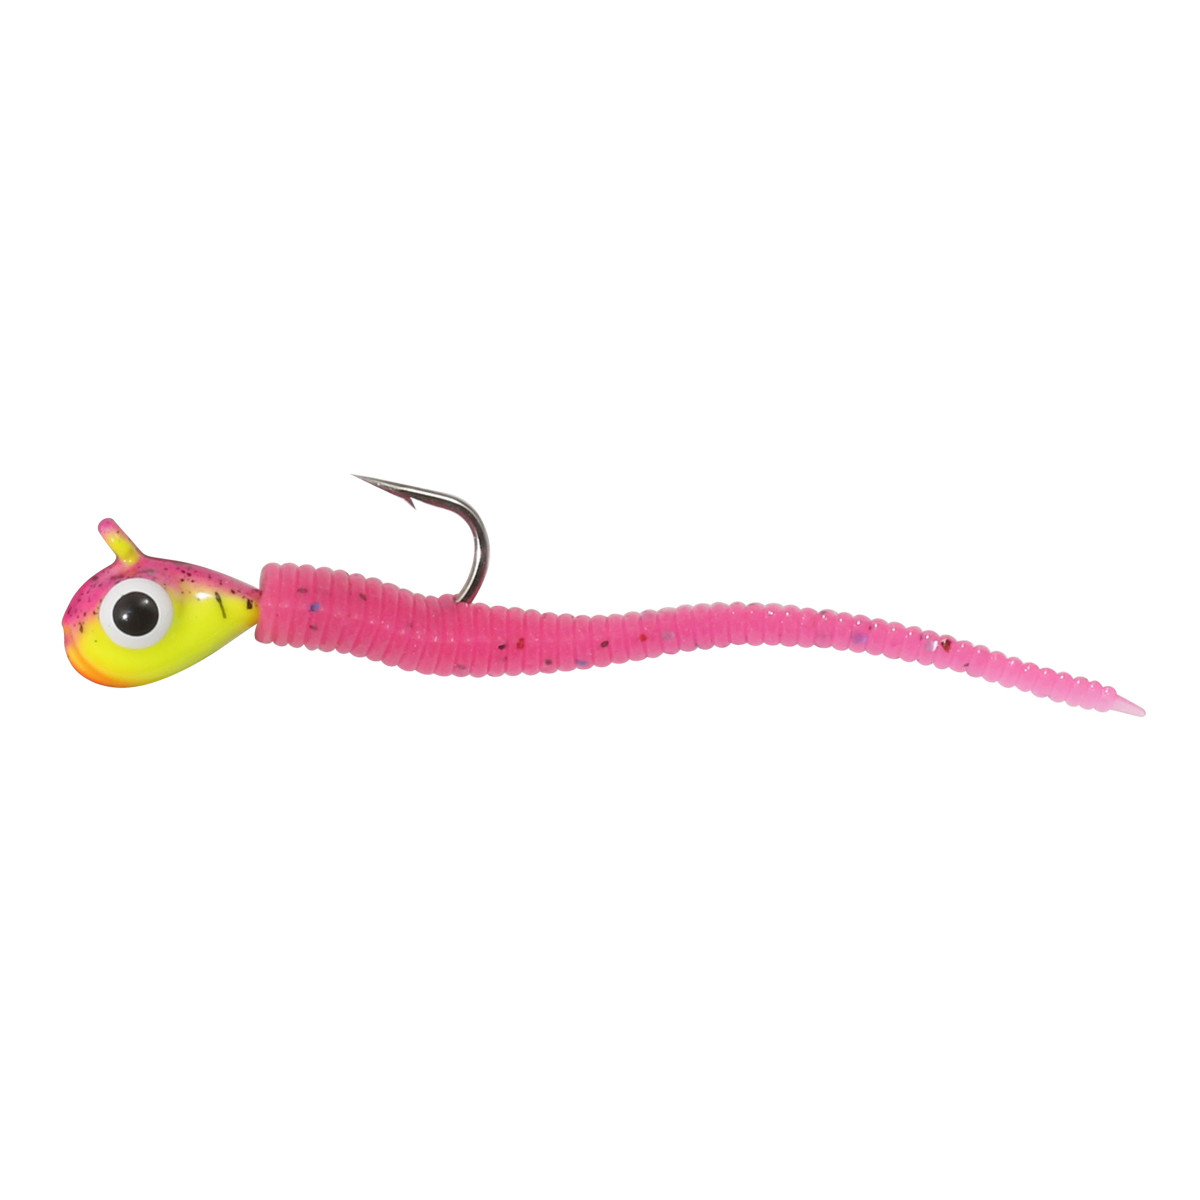 https://cs1.0ps.us/original/opplanet-northland-fishing-tackle-rigged-tungsten-bloodworm-lure-fruit-fly-1-28-oz-tbr12-62-main